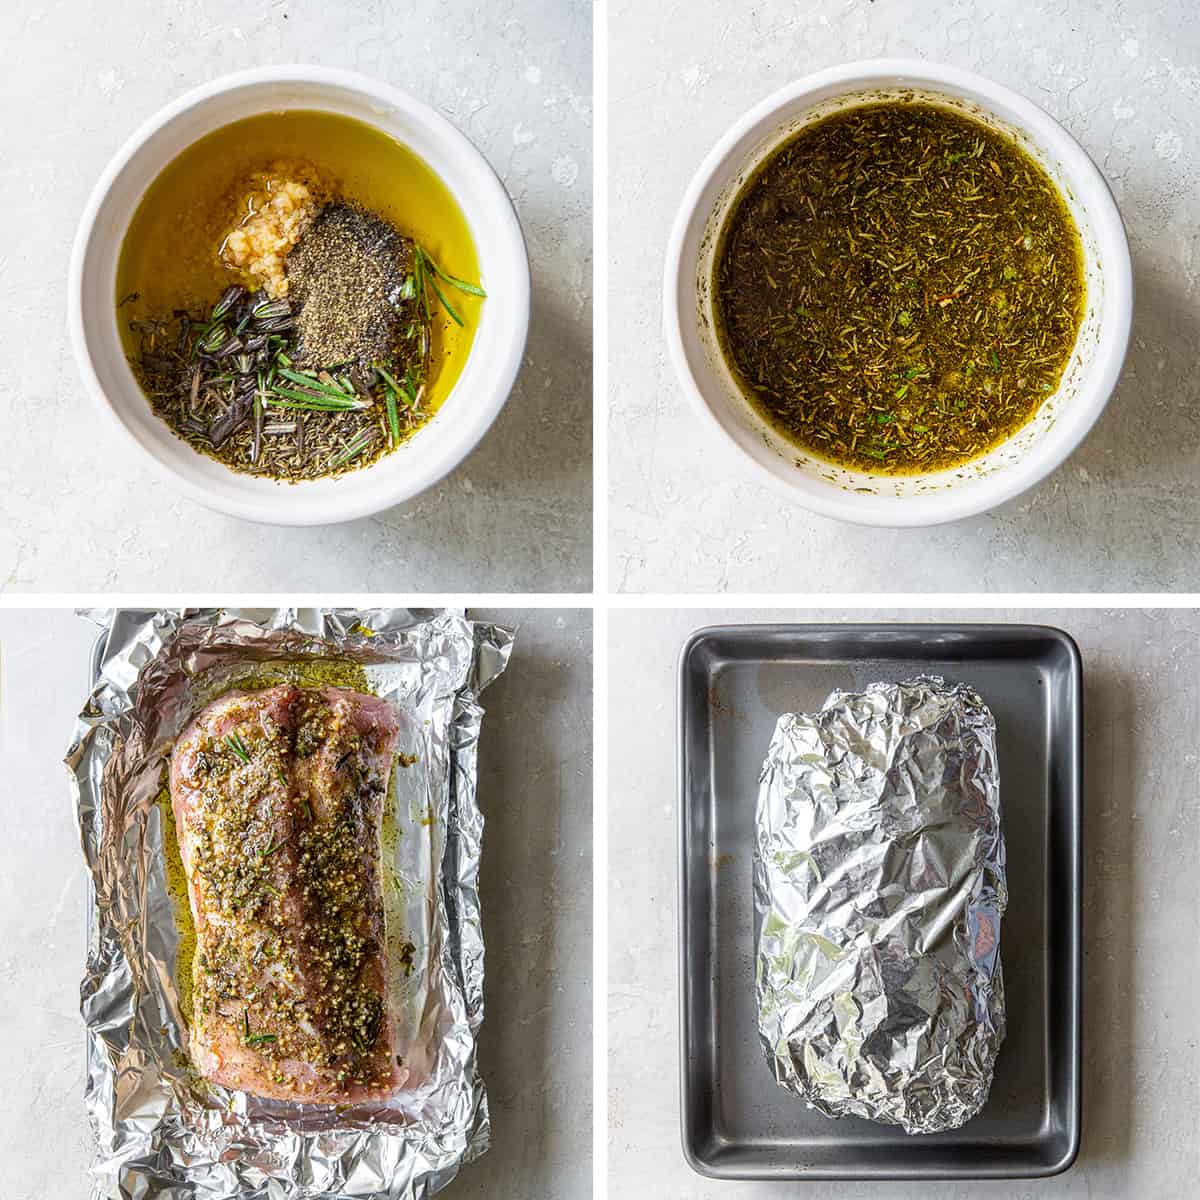 An oil and herb mixture on a pork loin roast in foil.